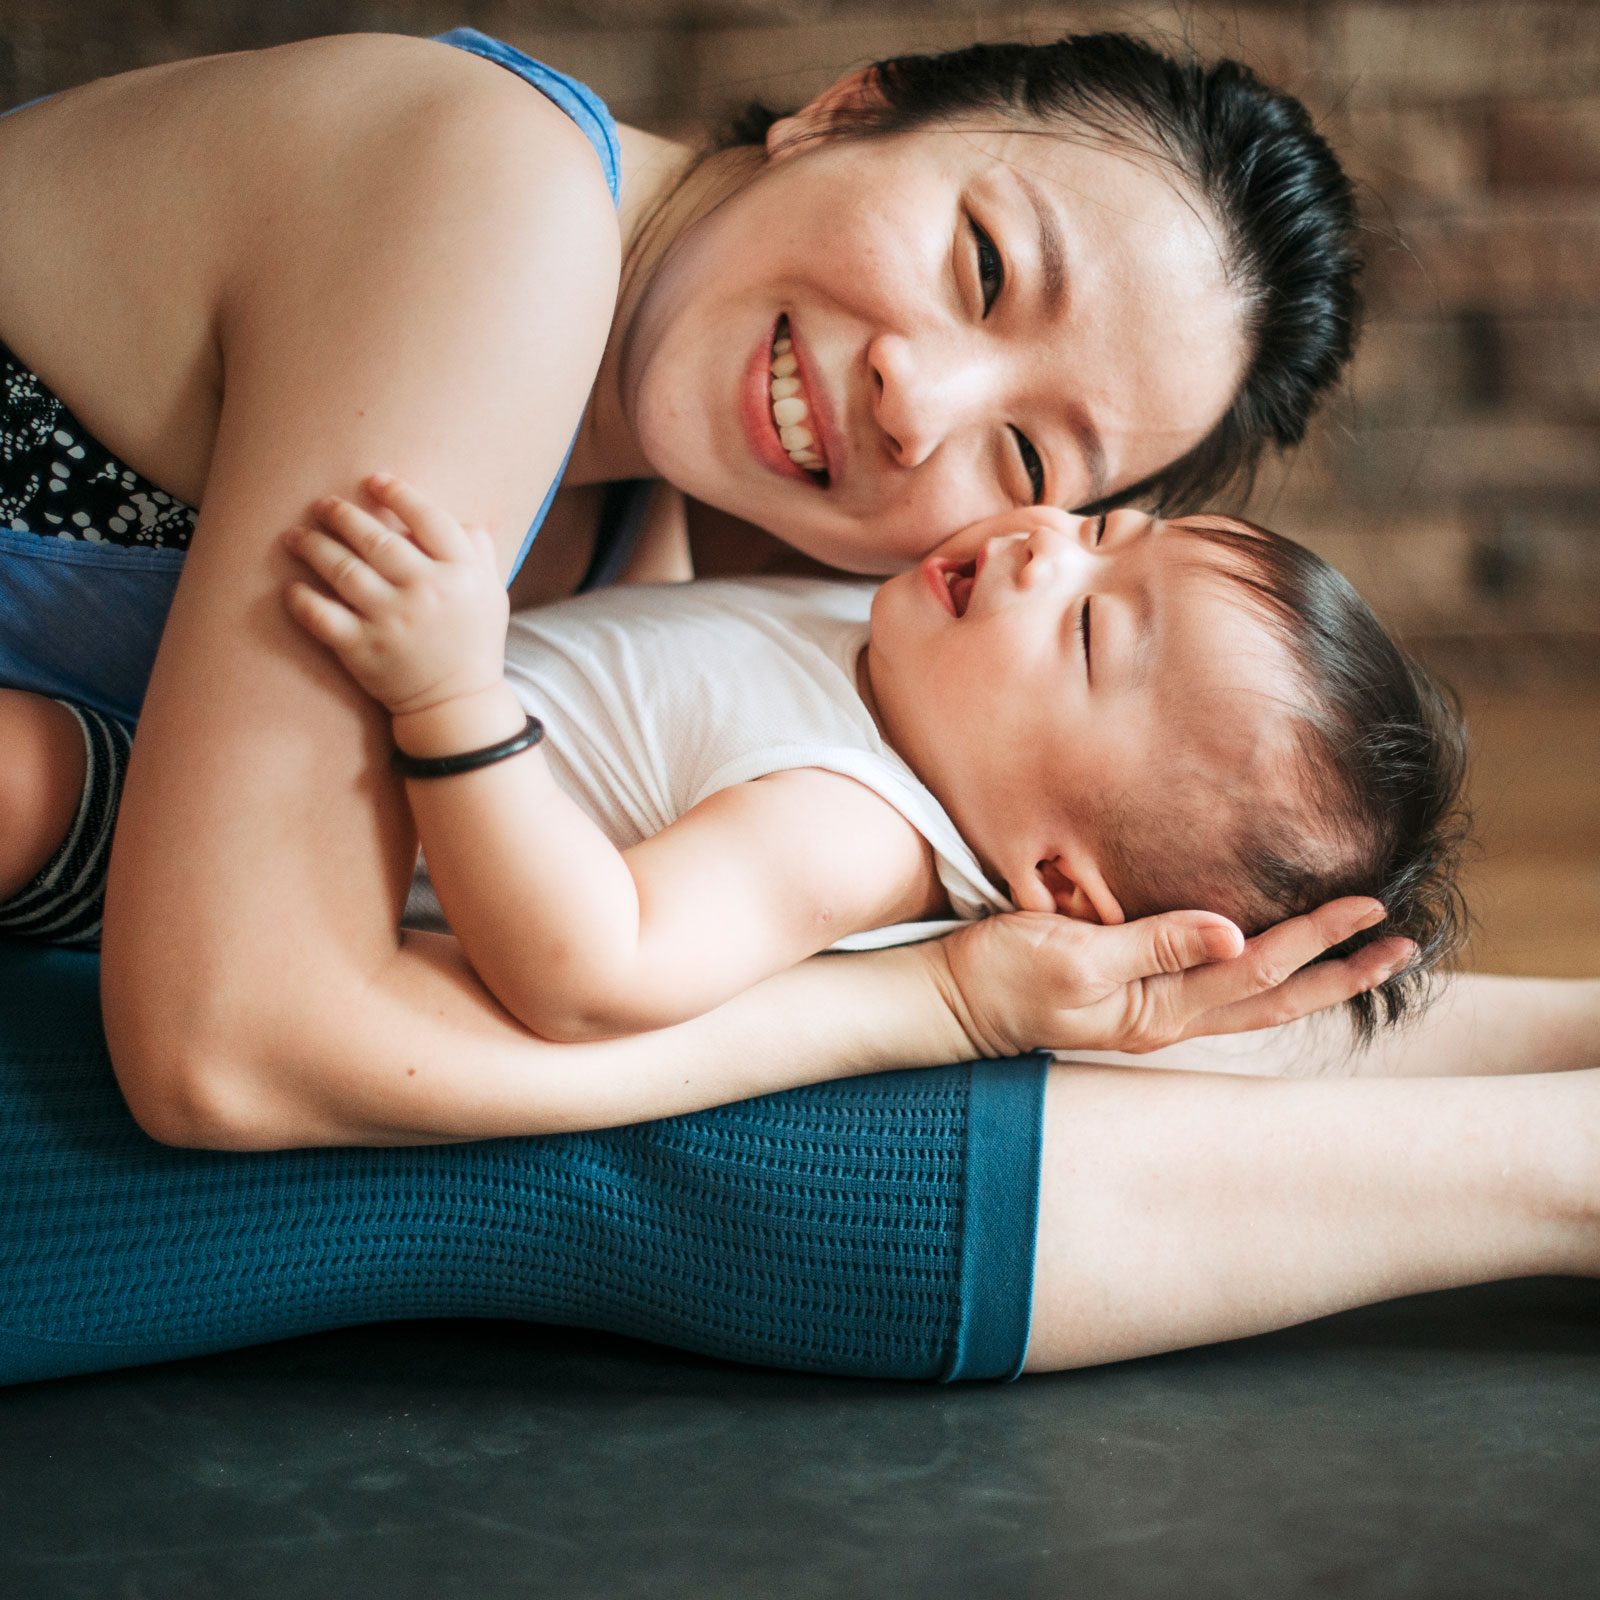 4 Postpartum Yoga Poses To Strengthen Your Core, From a Certified Yoga & Postnatal Instructor